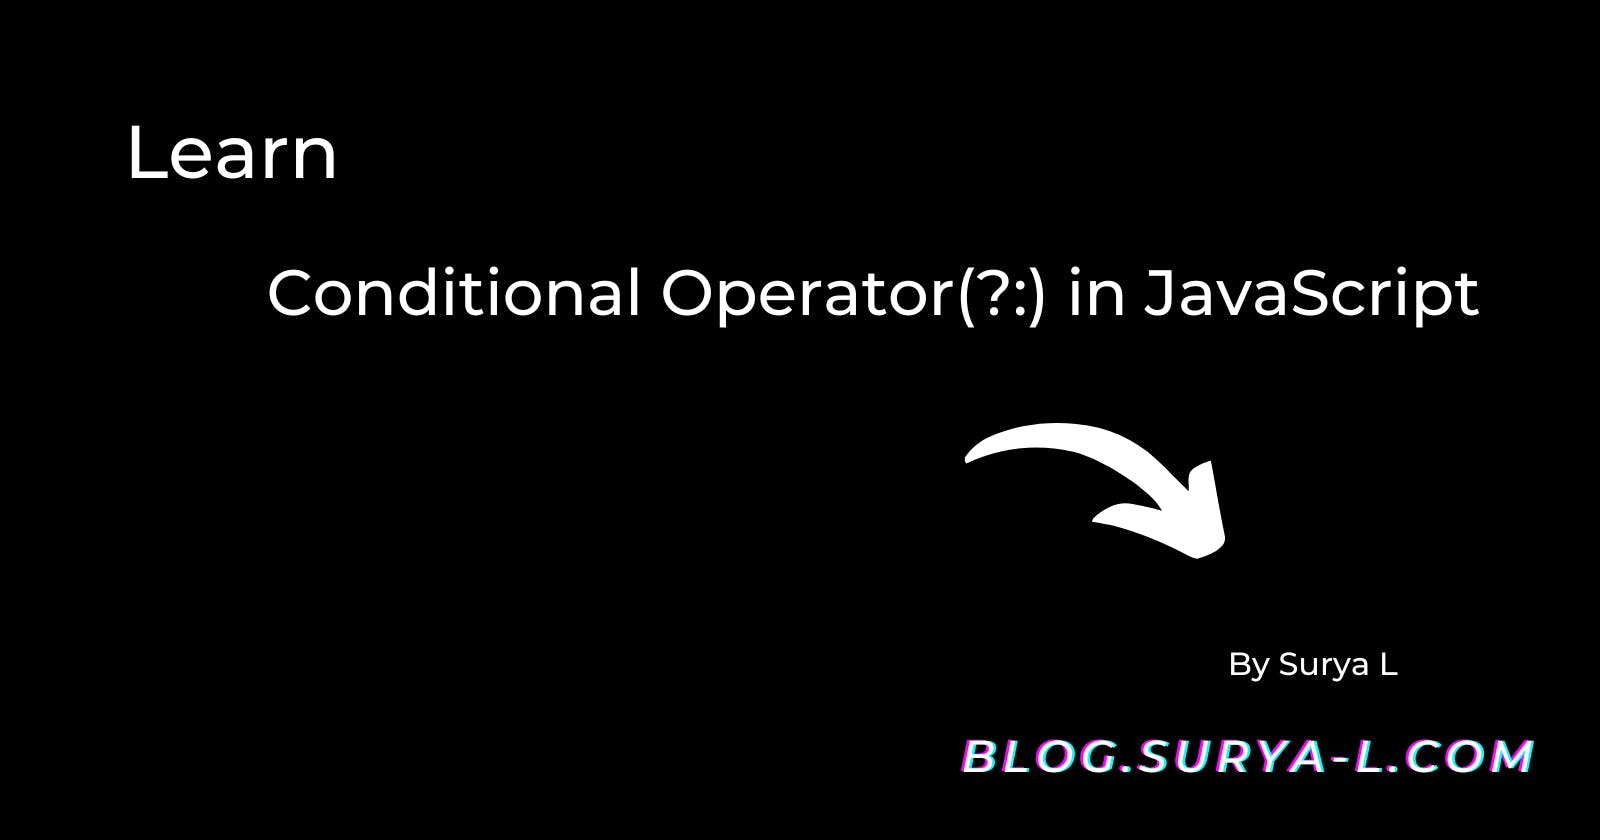 Learn Conditional (Ternary) Operator in JavaScript